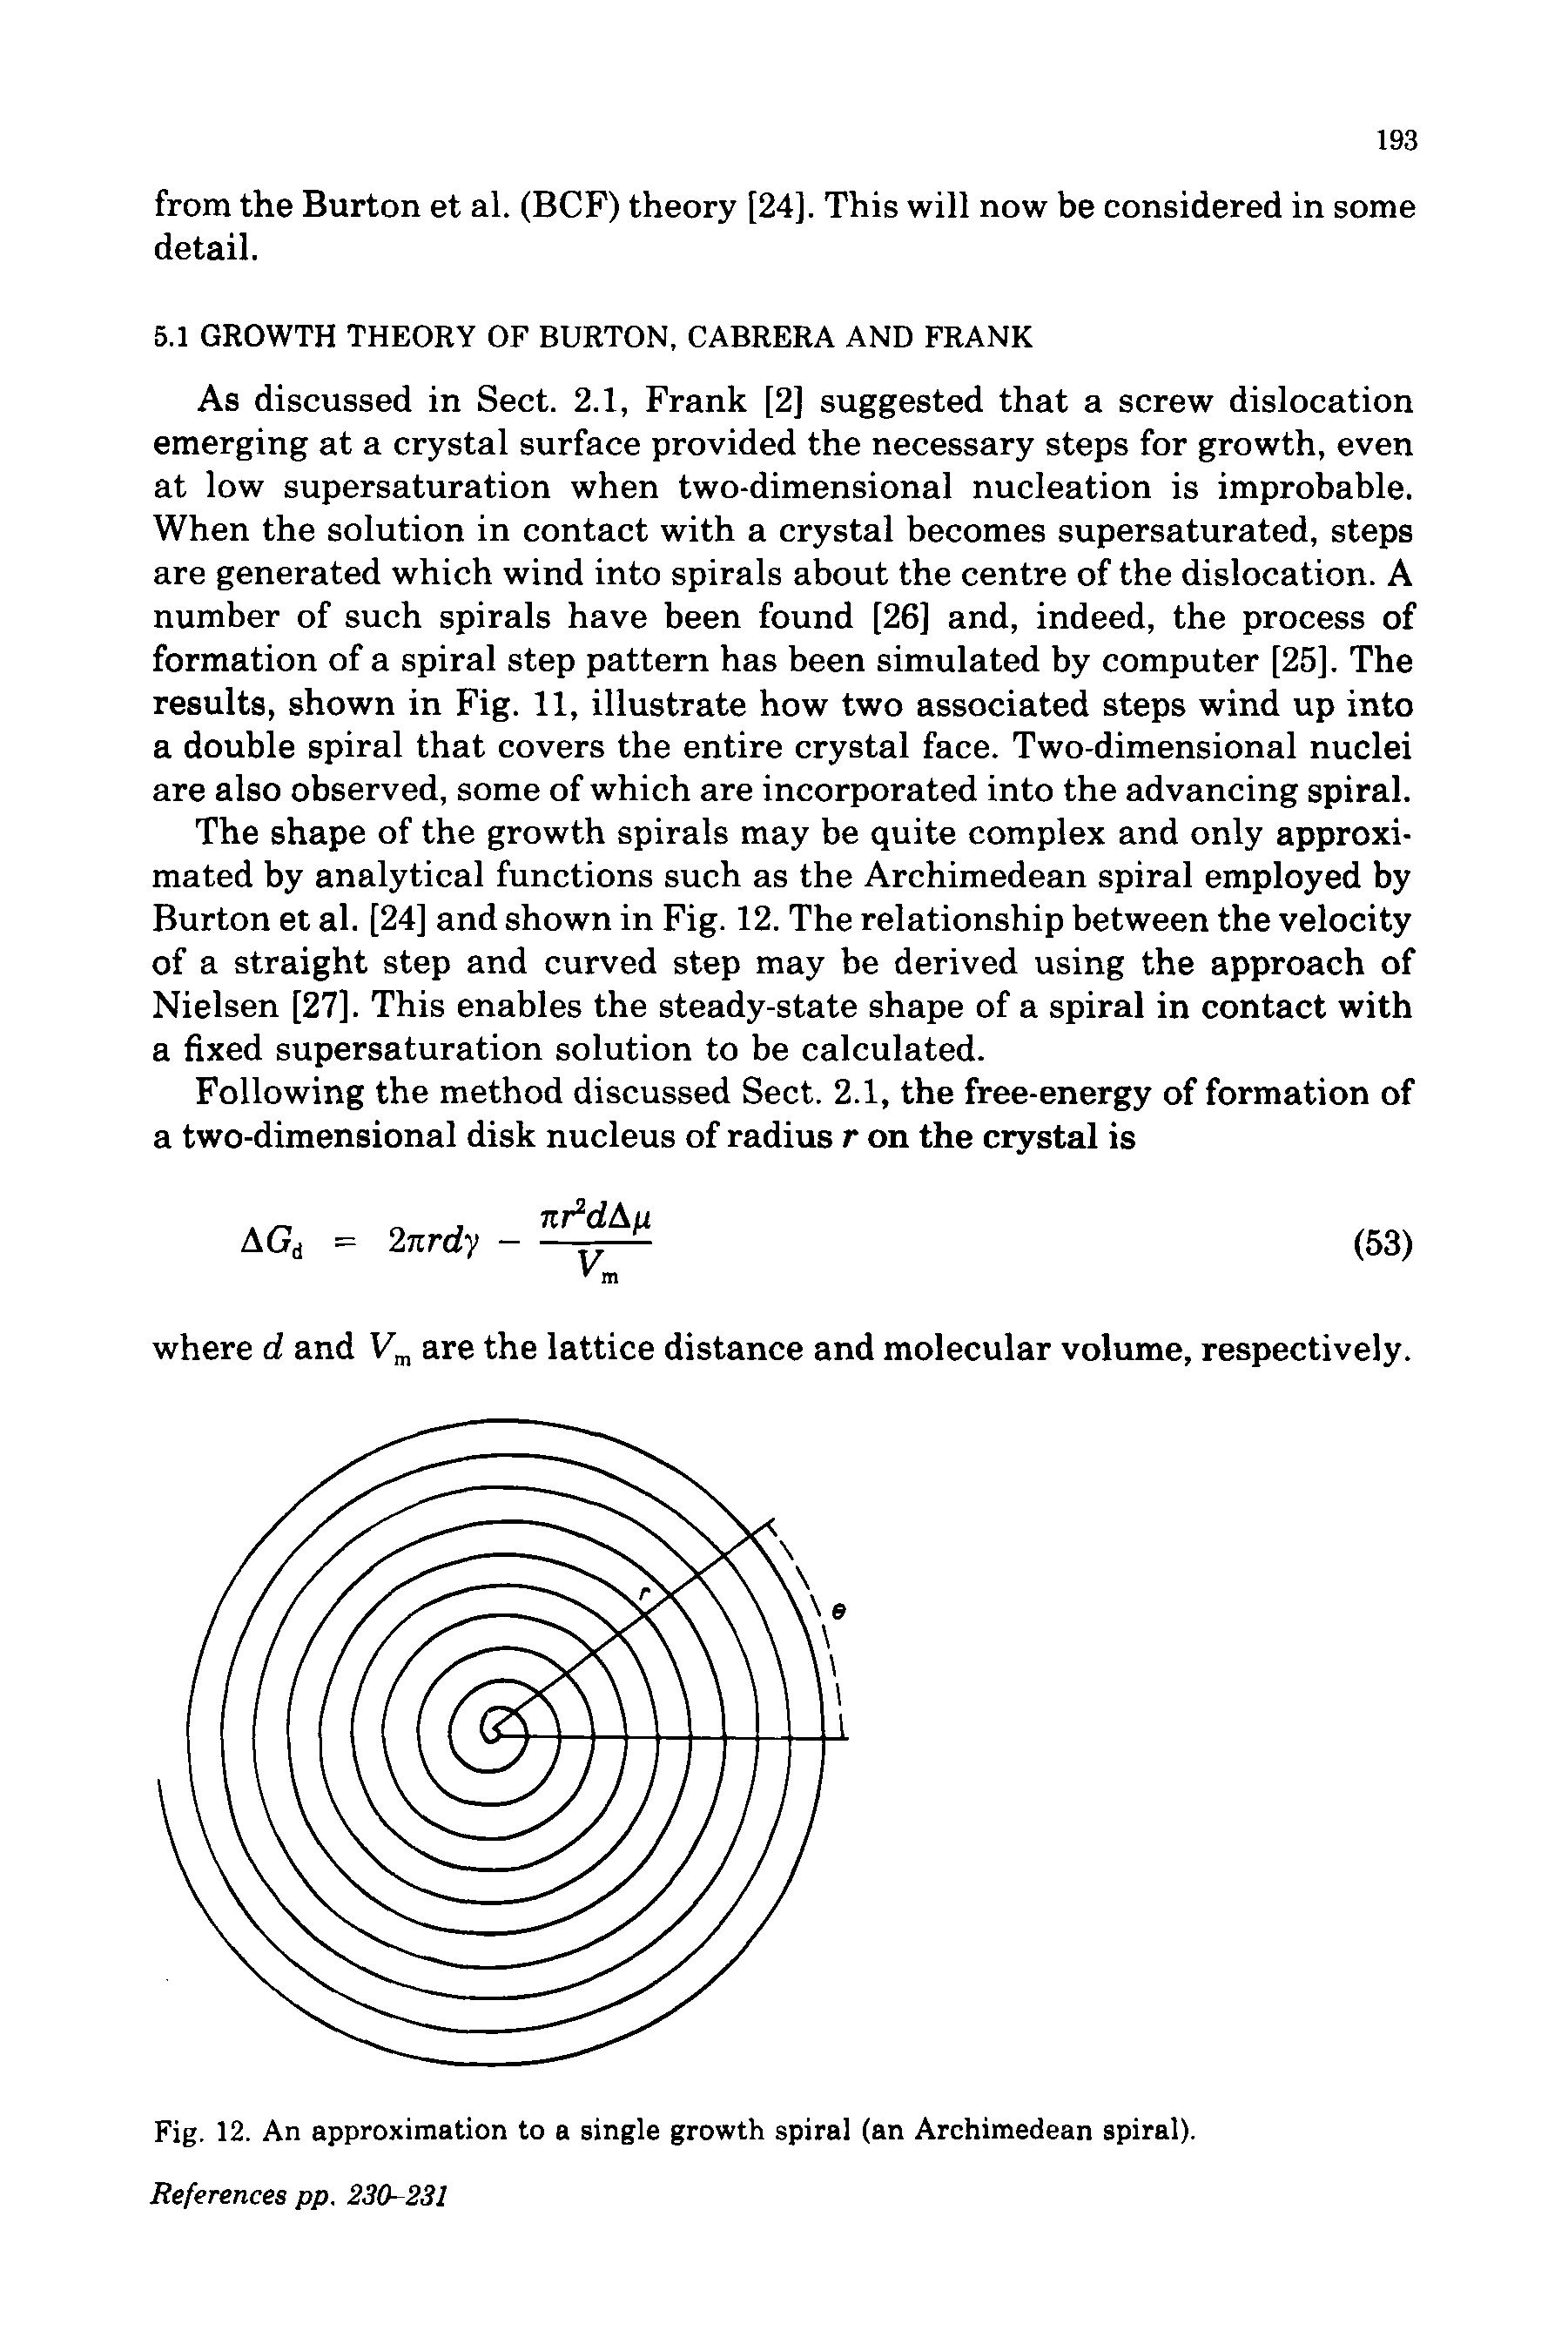 Fig. 12. An approximation to a single growth spiral (an Archimedean spiral). References pp. 230-231...